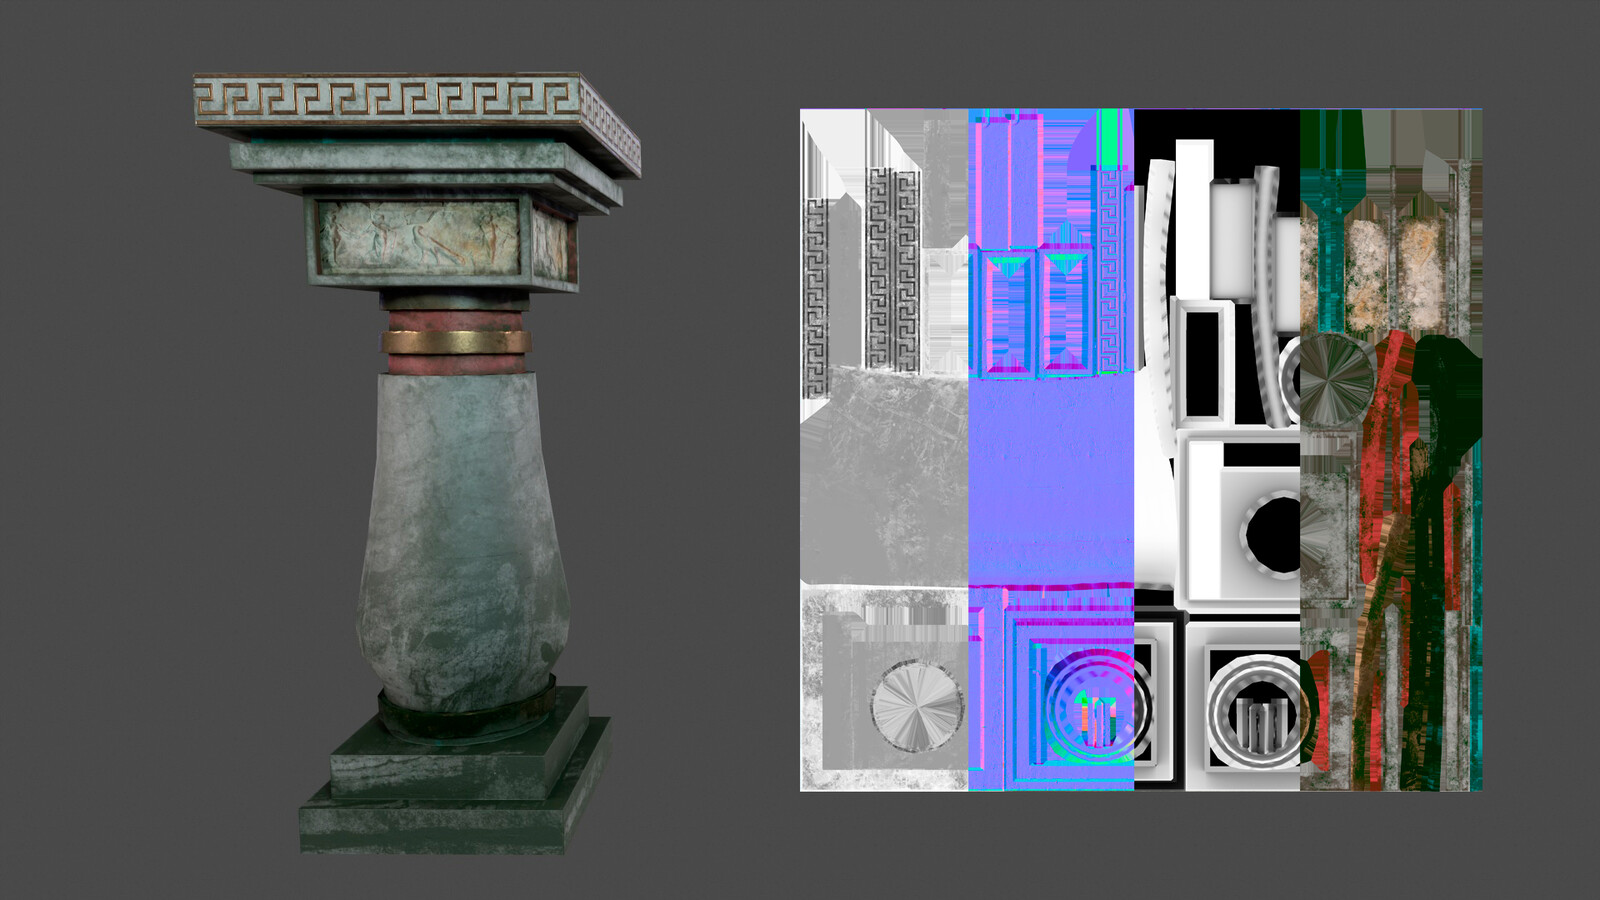 Balcony Base Column Asset, UVs, Roughness map, Normal map, Ambient Oclusion map, Color map.